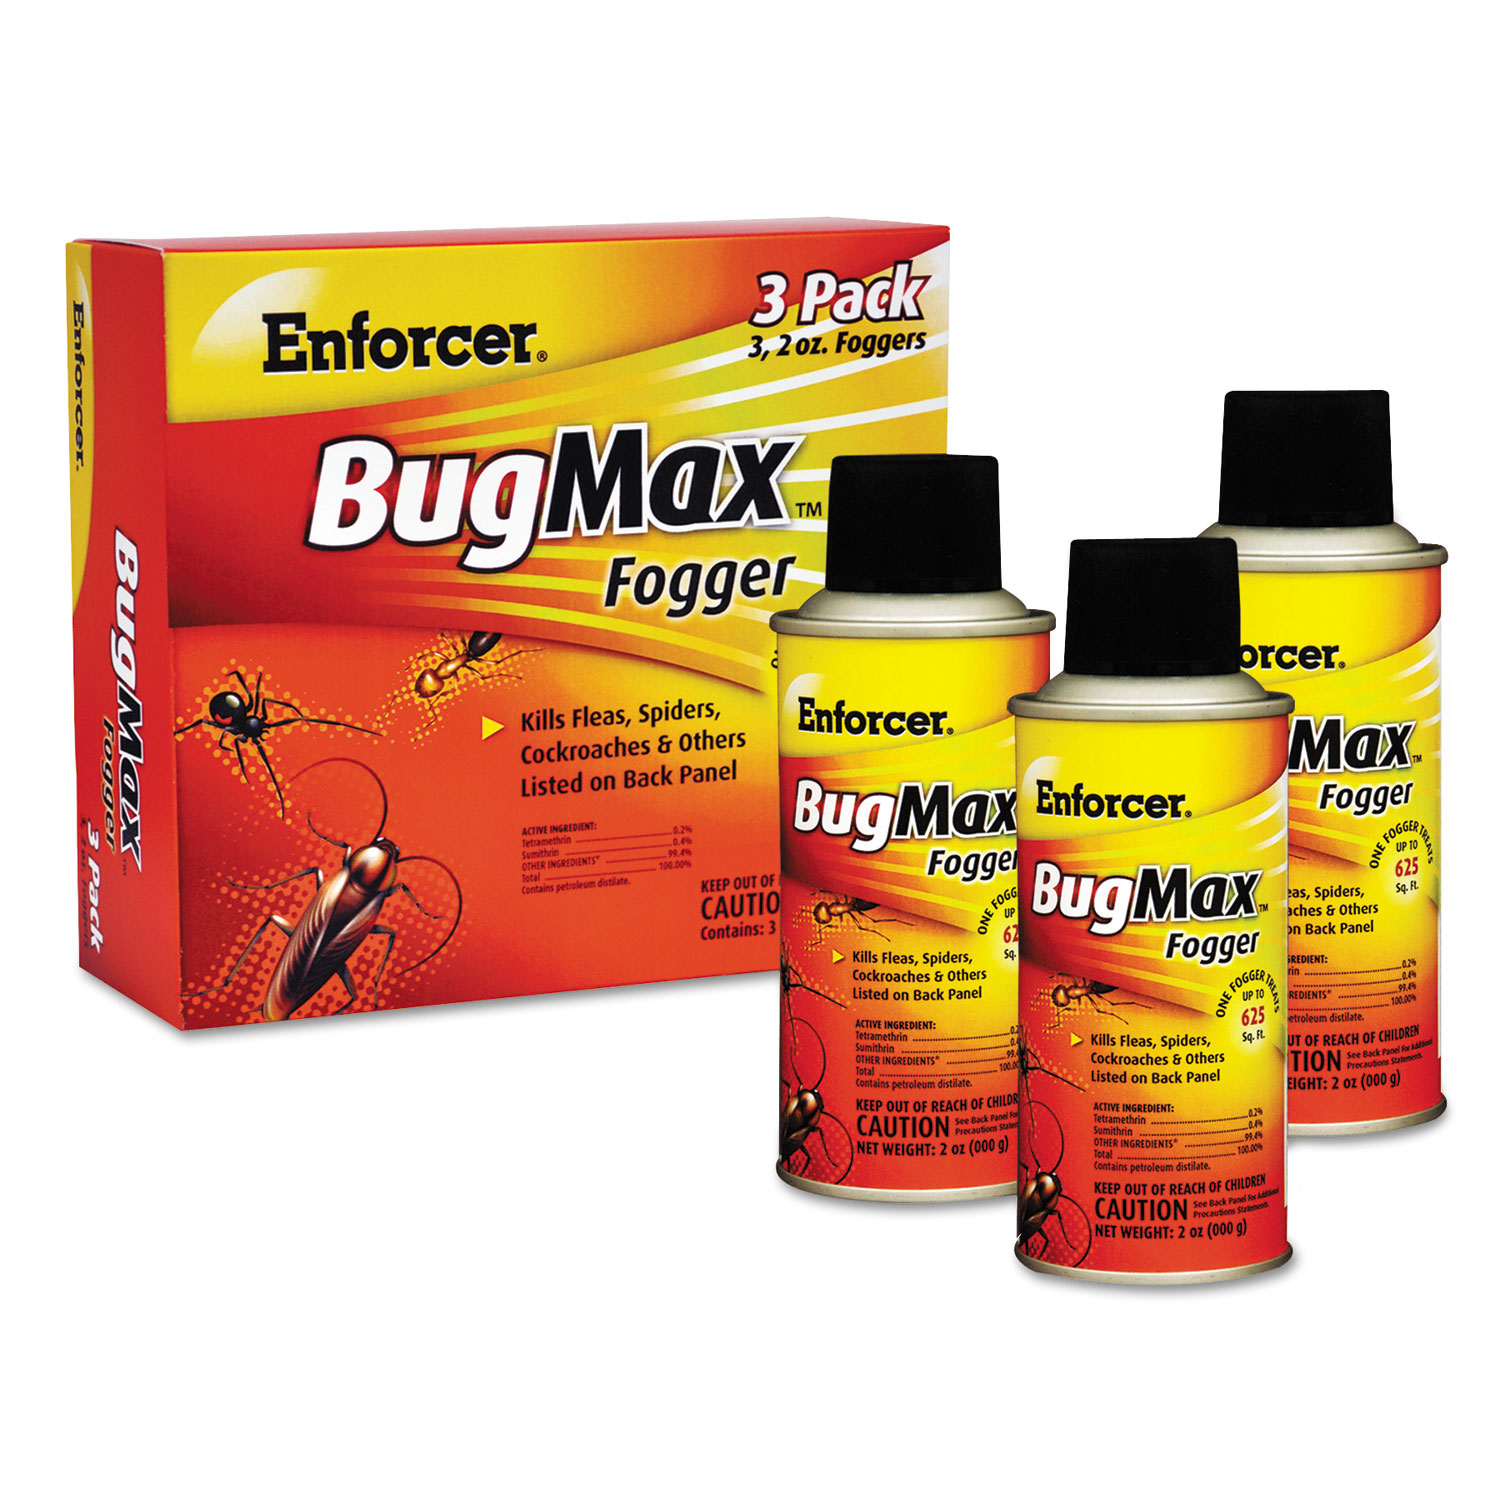 BugMax Fogger, 2 oz, For Ants/Cockroaches/Crickets/Spiders